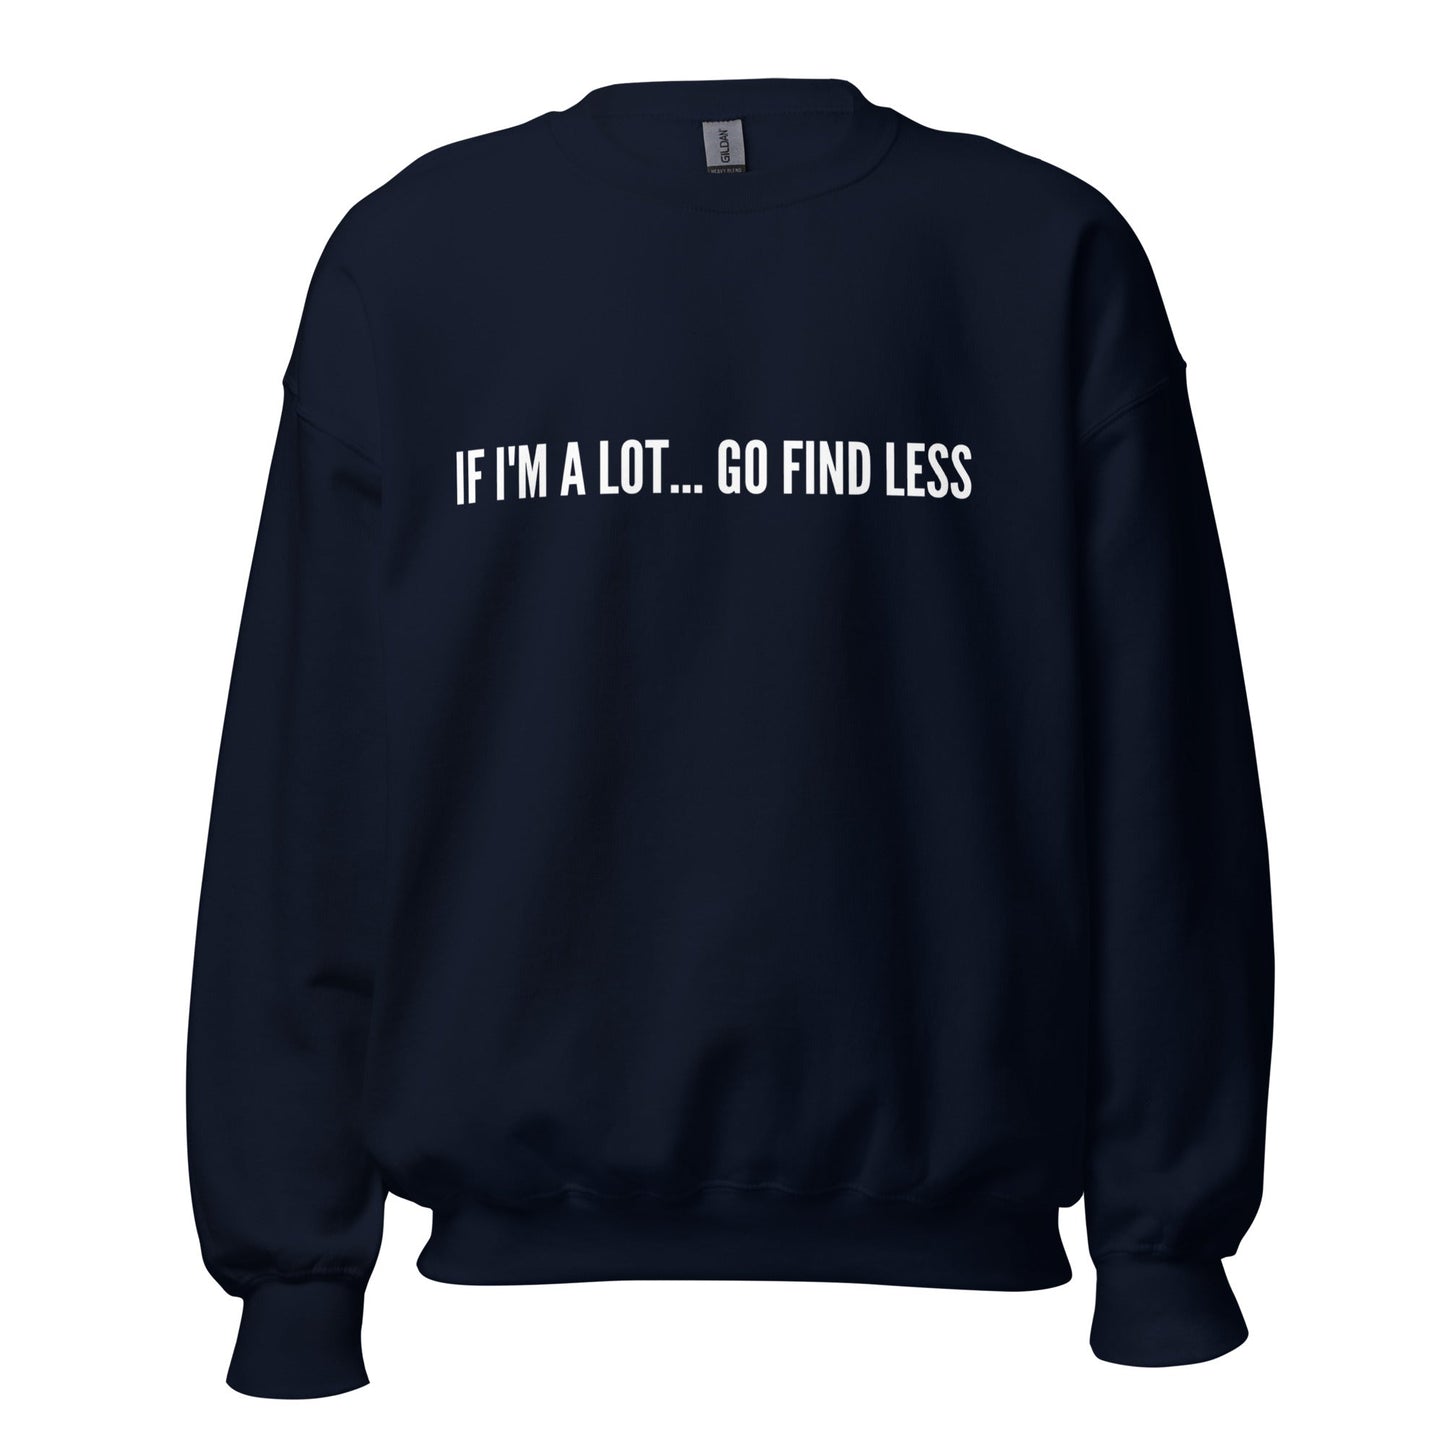 If I'm A lot Go Find Less Unisex Sweatshirt (For a Slim Fit Order A Size Down) - Catch This Tea Shirts